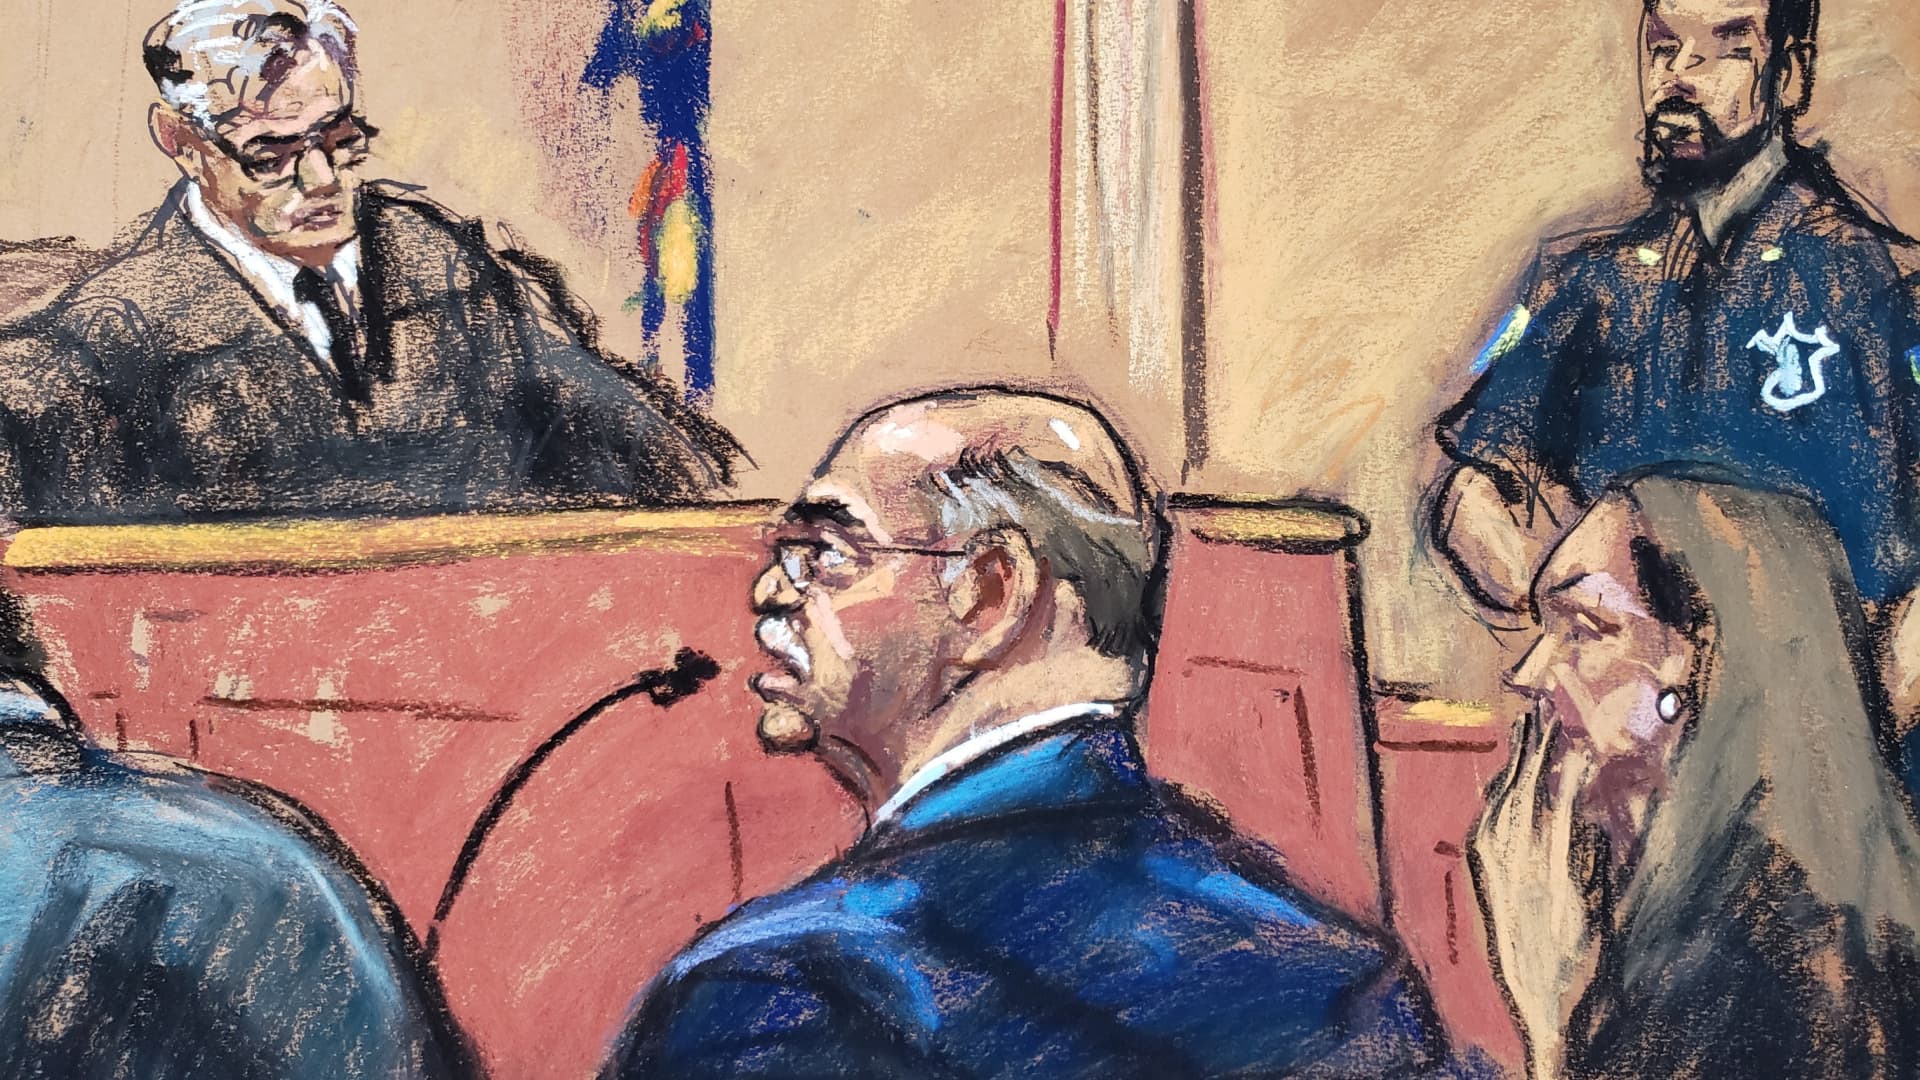 Allen Howard Weisselberg, the former Trump Organization CFO, sits in New York State Supreme Court with his lawyer Mary Mulligan, as he pleads guilty during his hearing in the Manhattan borough of New York City, August 18, 2022 in this courtroom sketch.